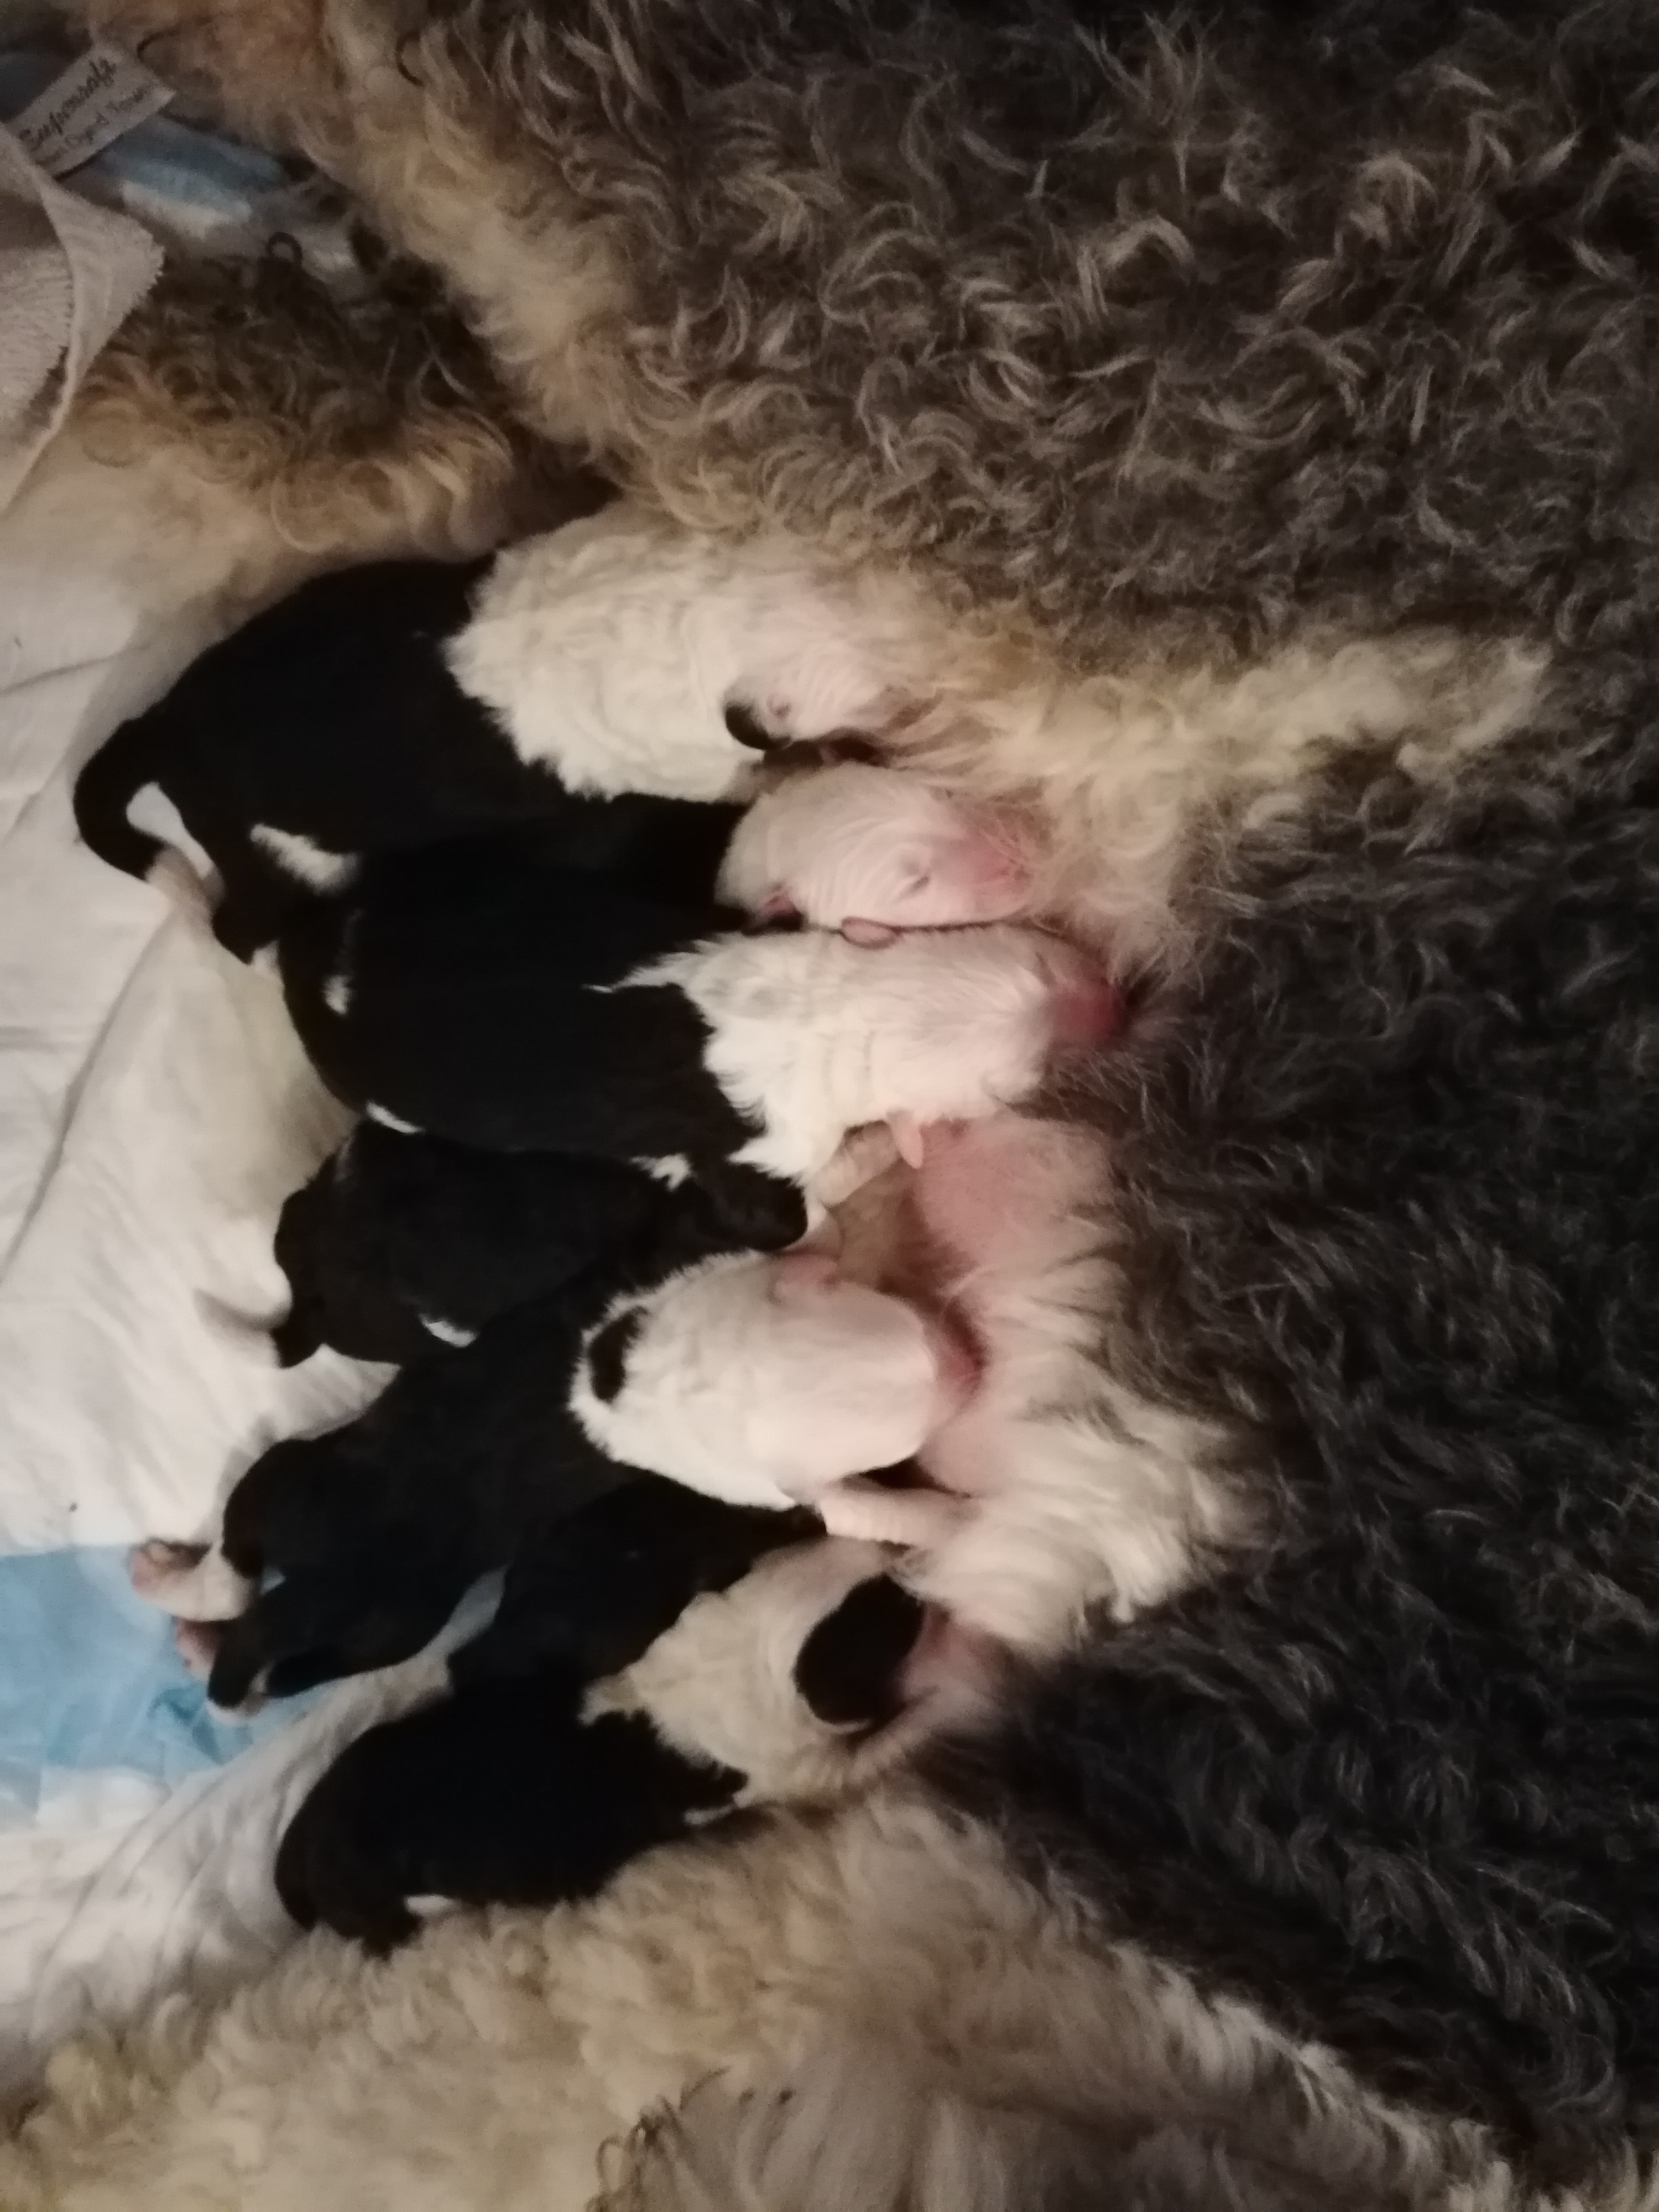 Only 2 days old